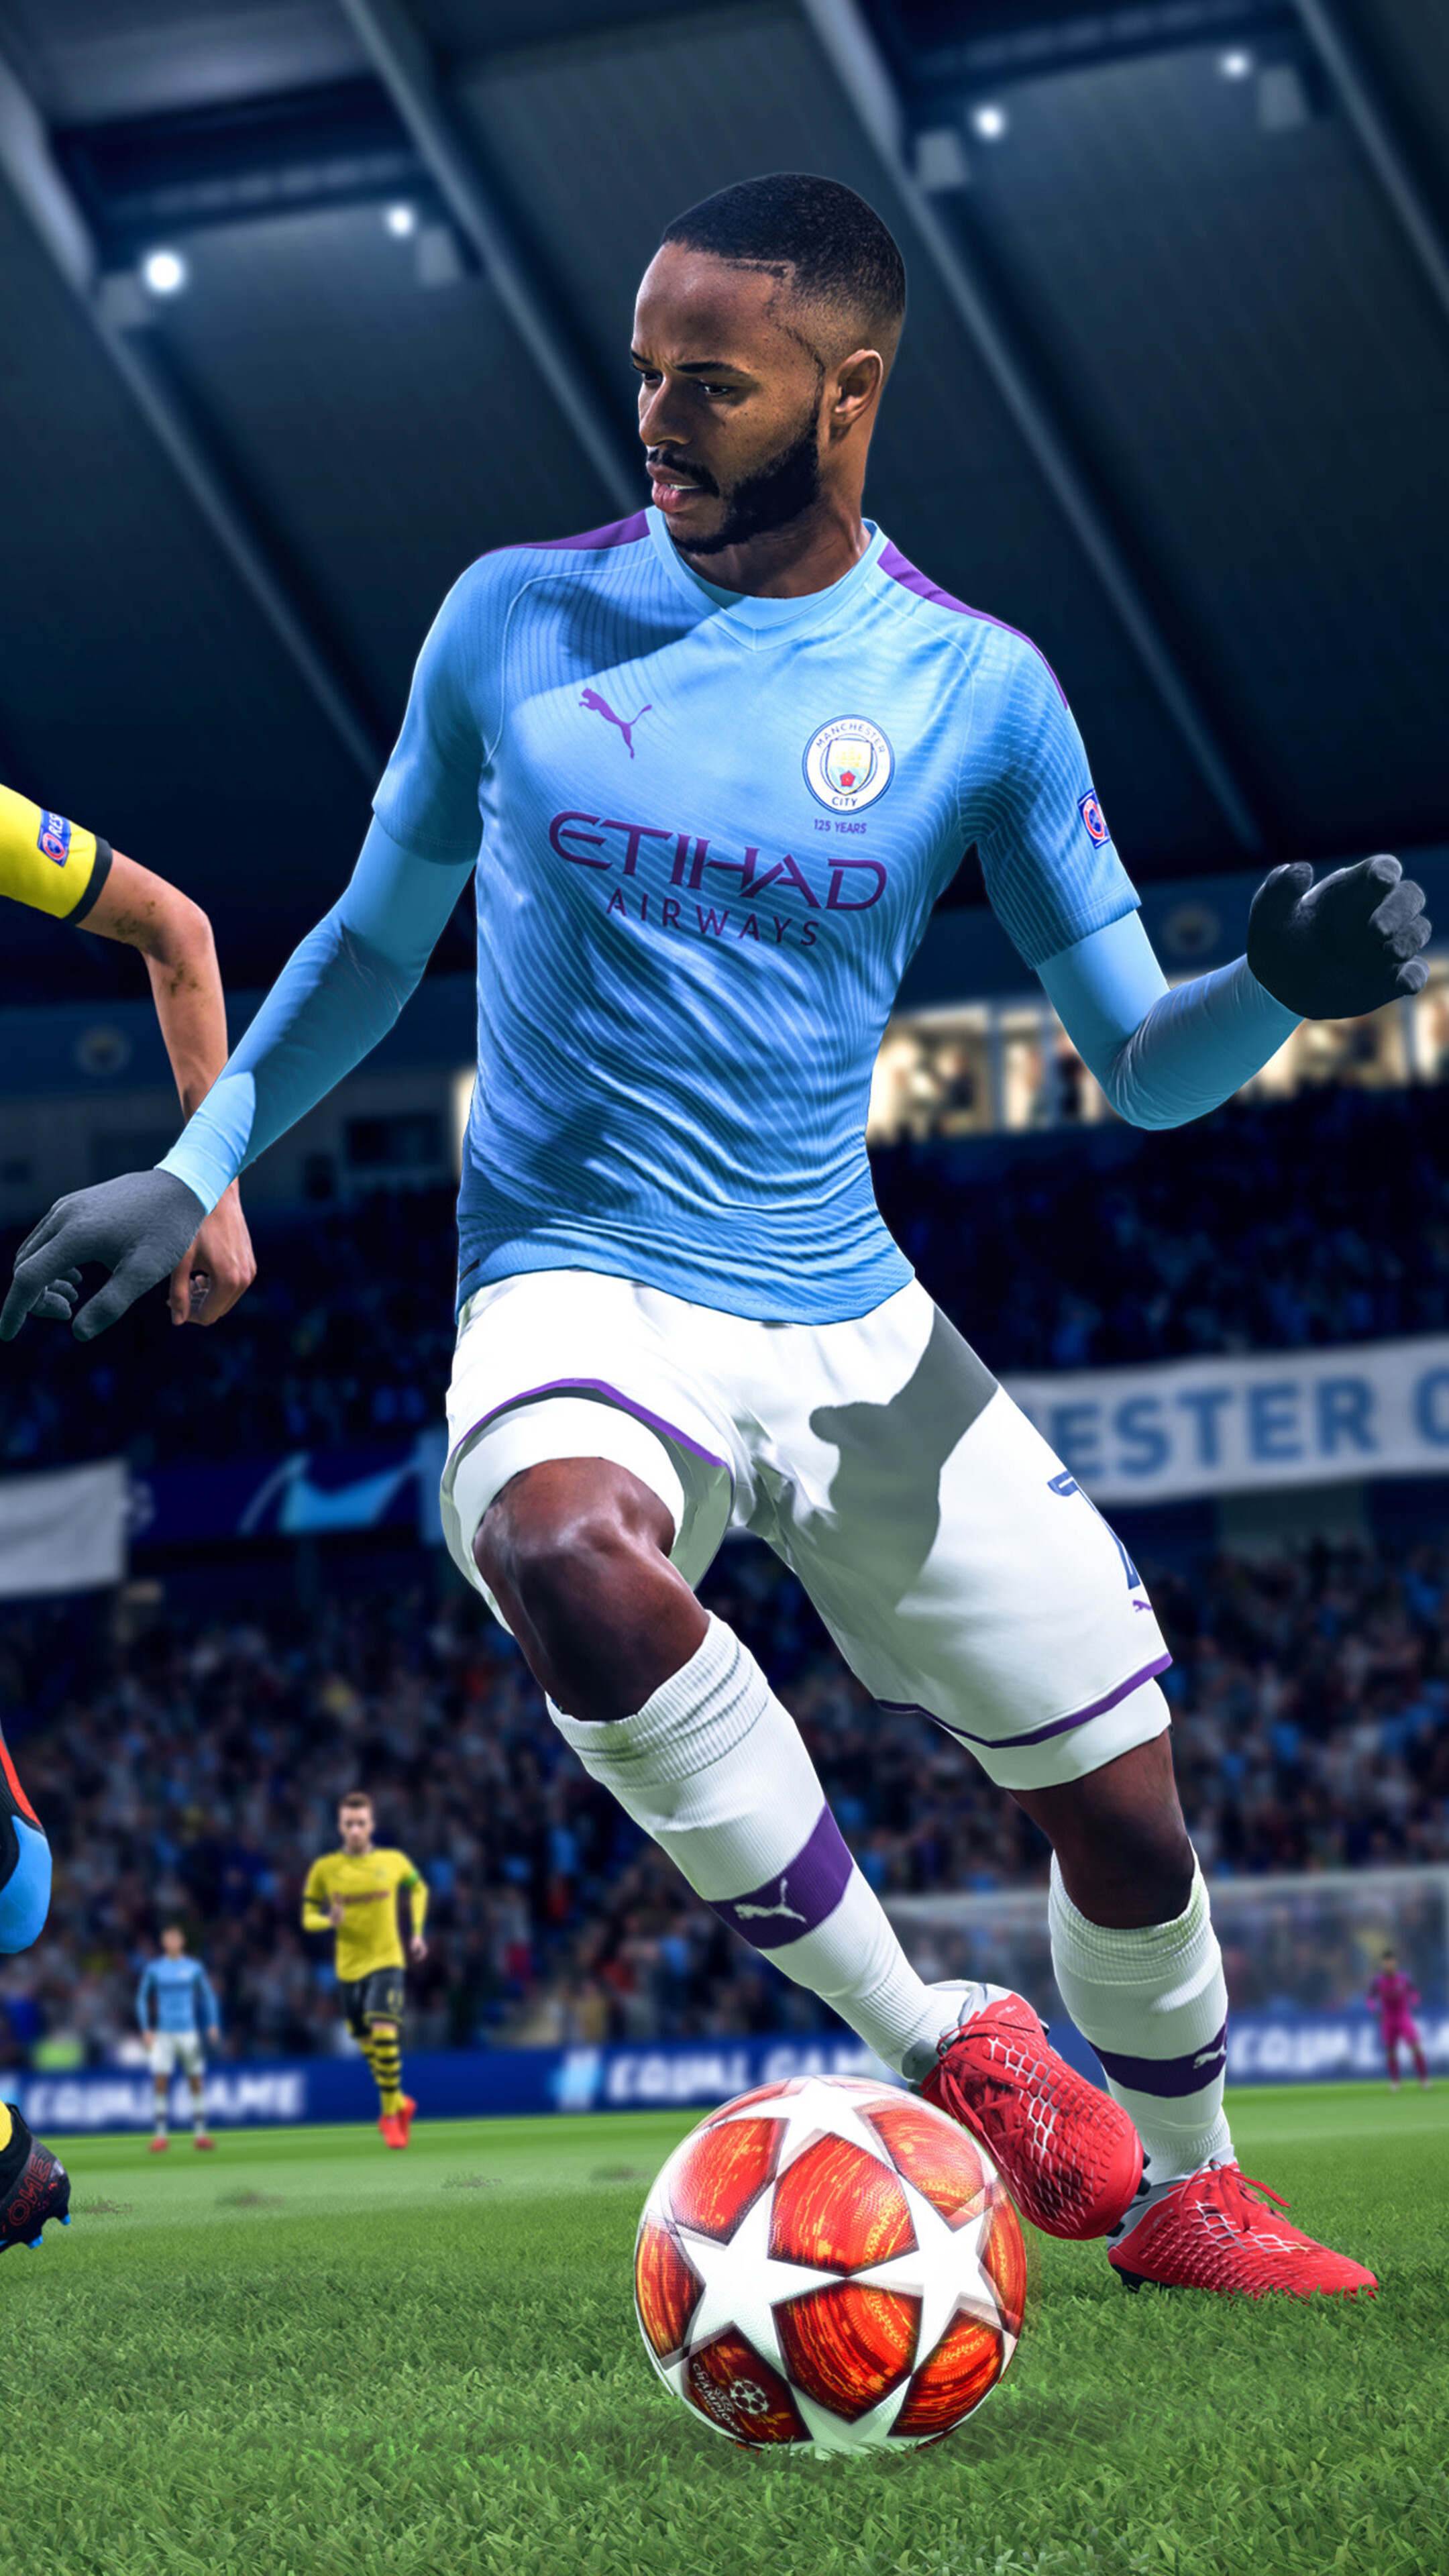 FIFA Soccer (Game): A series of association football video games, Released annually by Electronic Arts. 2160x3840 4K Wallpaper.